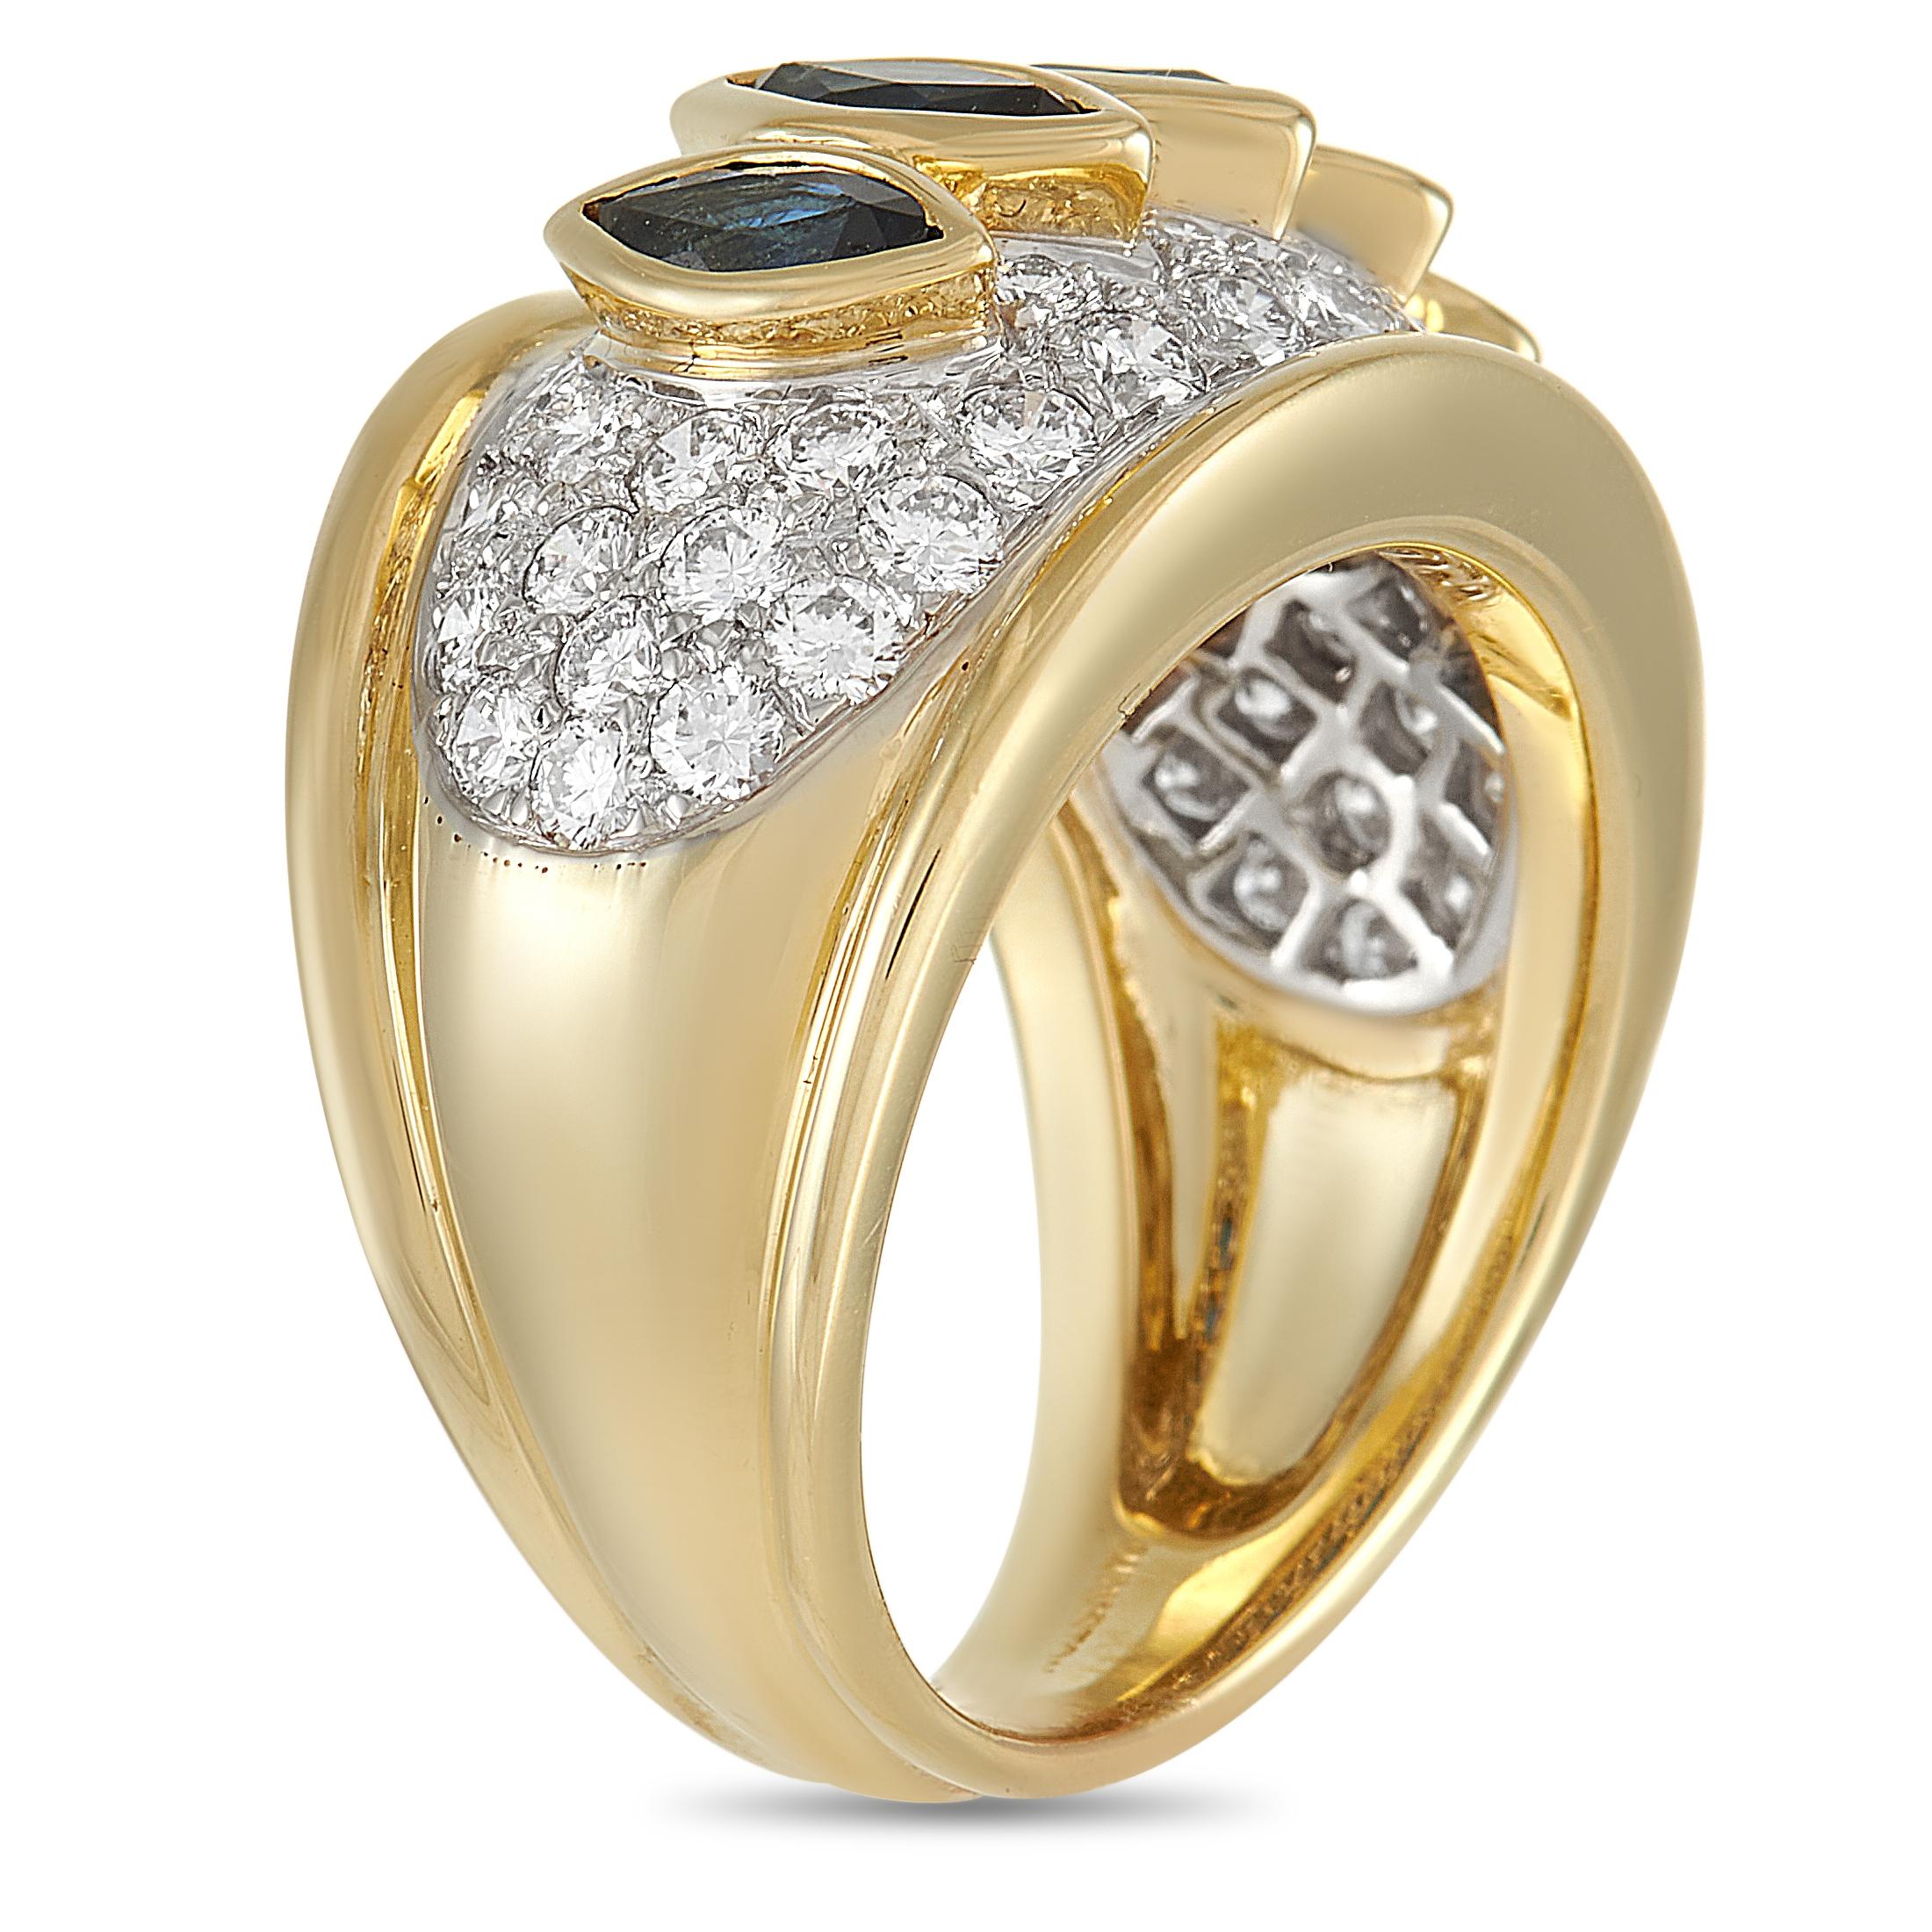 This Harry Winston ring features an opulent appearance that is virtually impossible to ignore. Its commanding presence begins with the 18K Yellow Gold band measuring 7mm wide. An array of glittering diamonds totaling 1.50 carats featuring E color